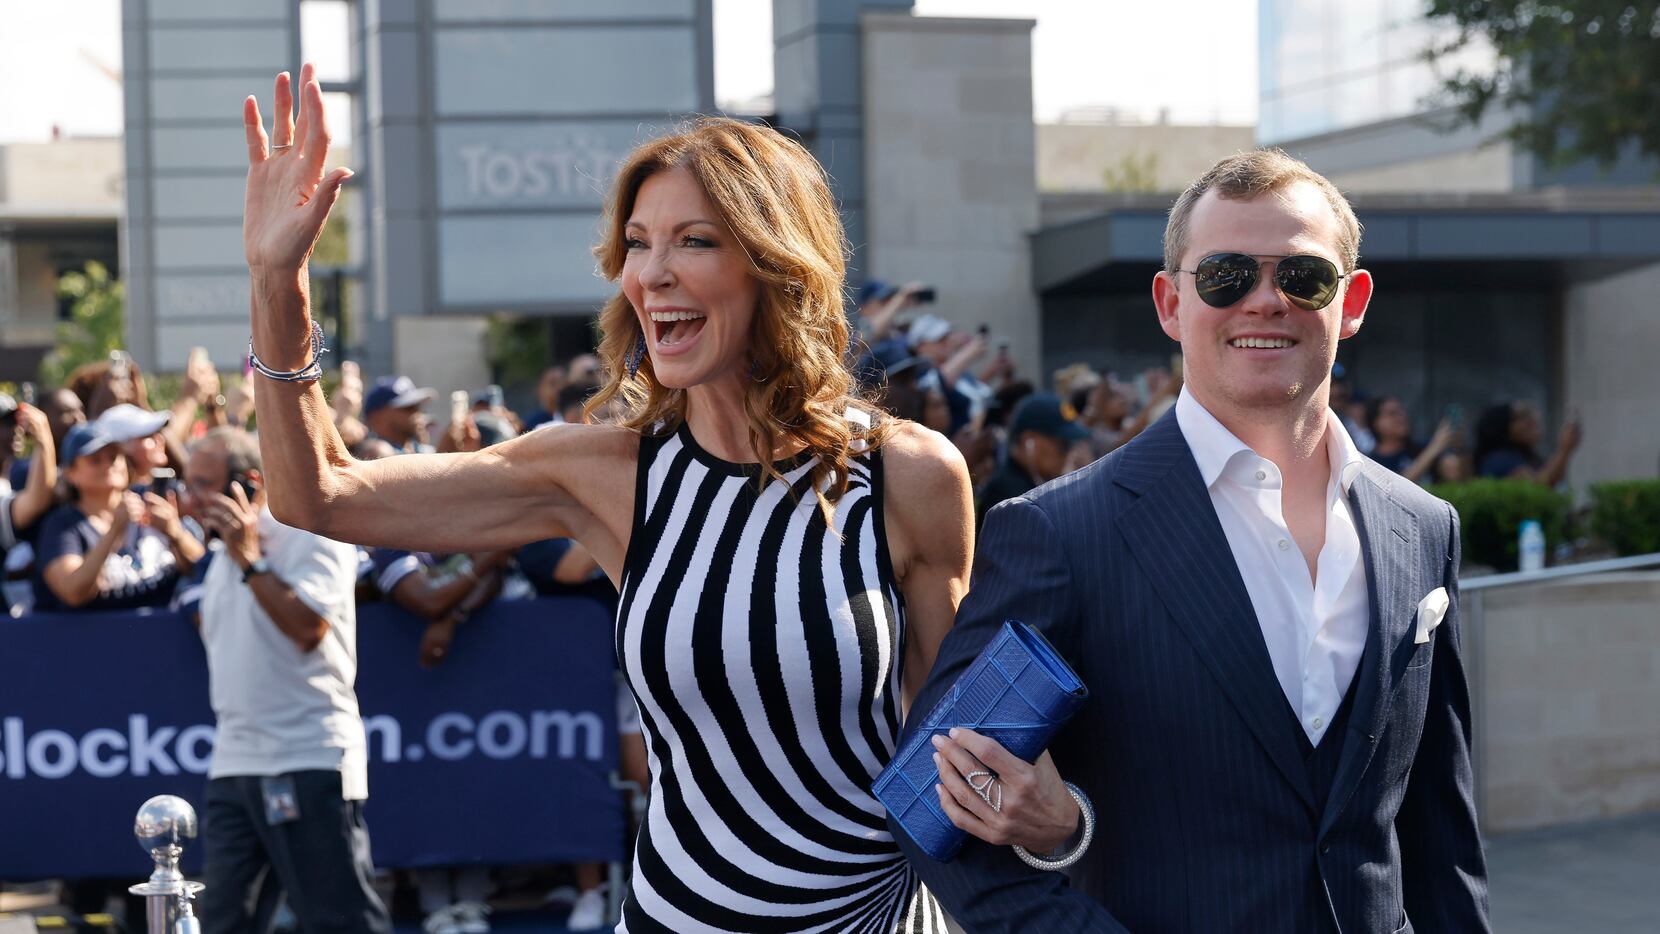 Dallas Cowboys executive vice president and chief brand officer Charlotte Jones waves to...